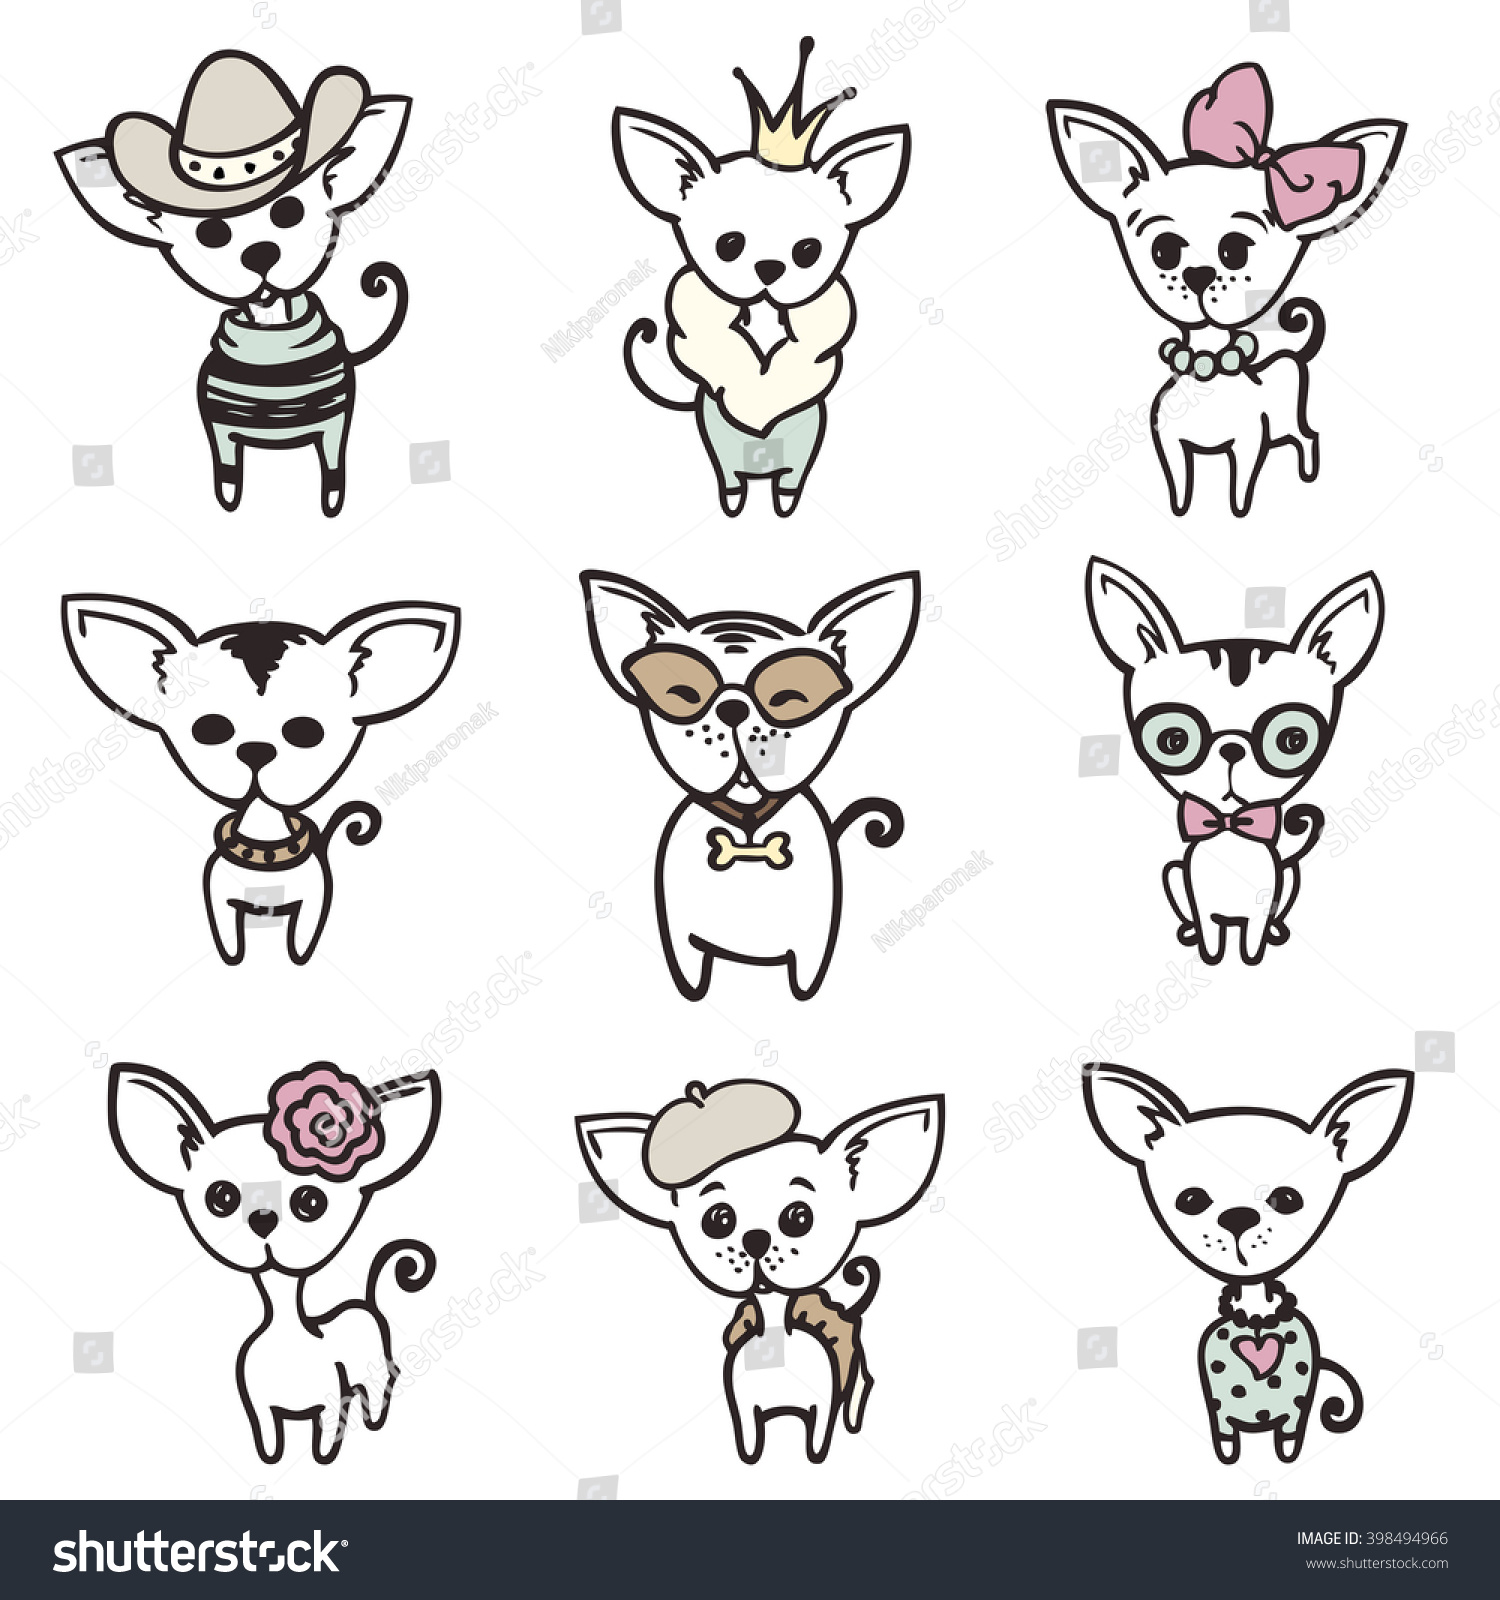 Adorable Chihuahua Doodle